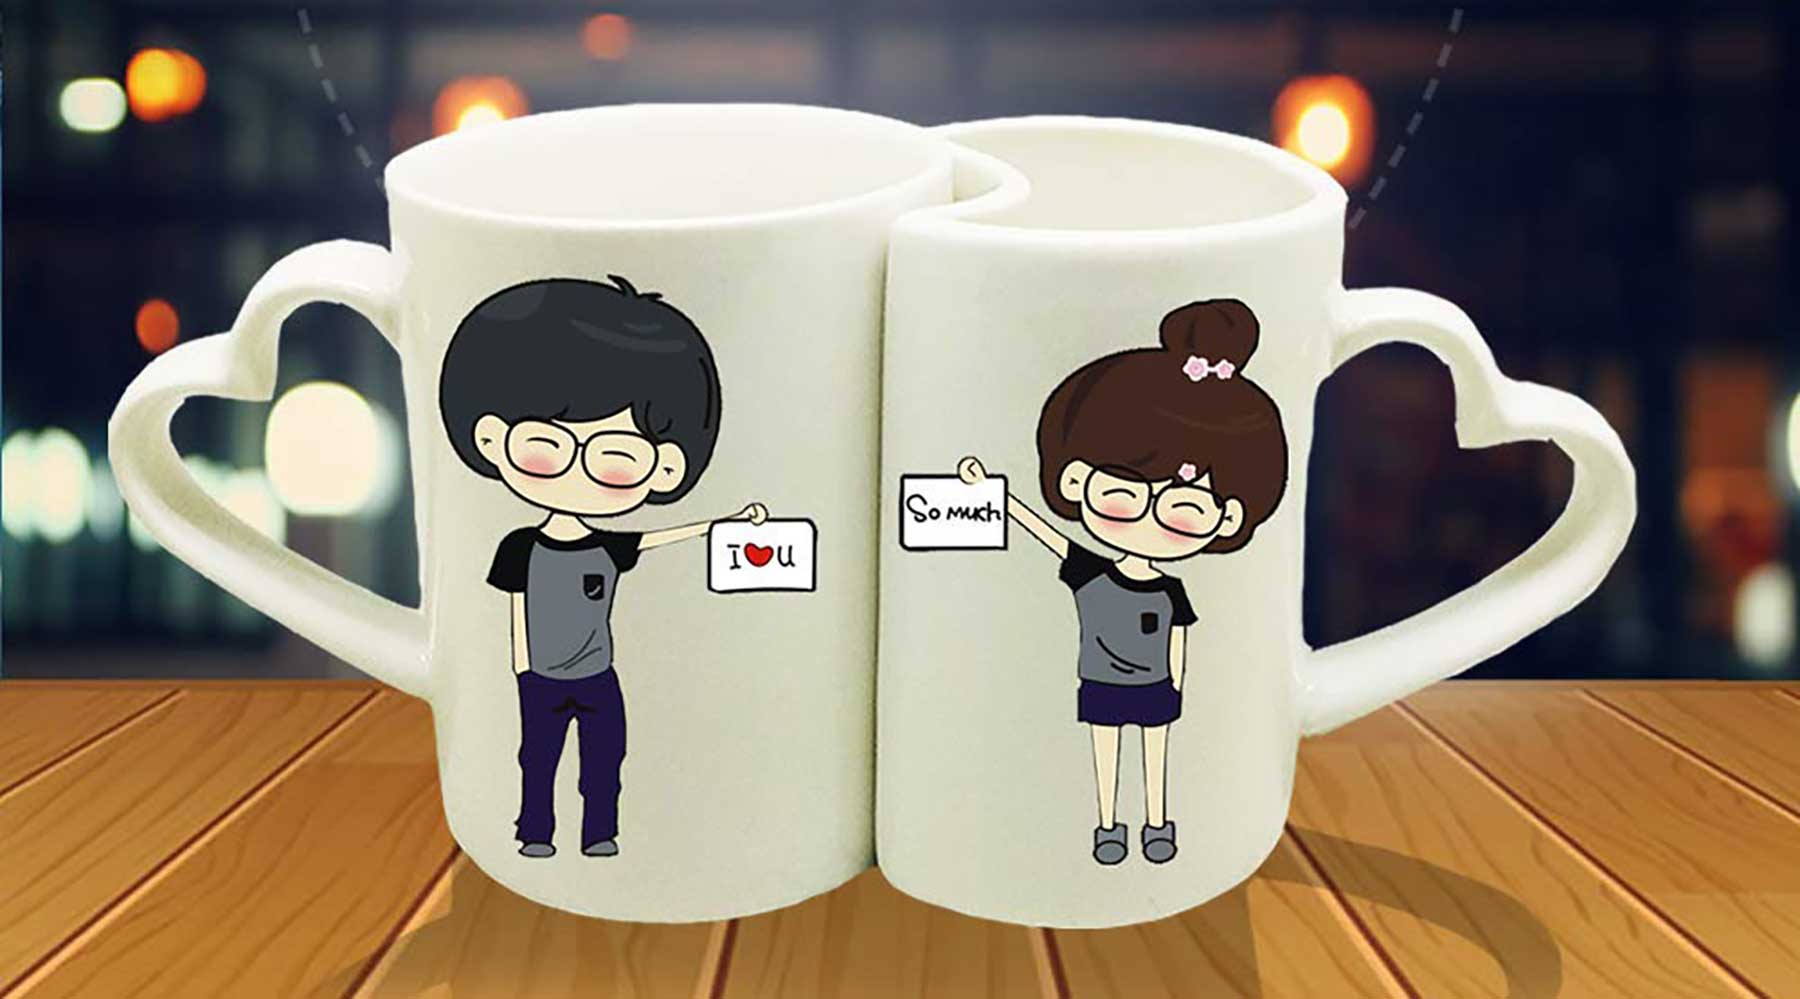 50+ Mug Design Ideas For Couples That Sell The Best